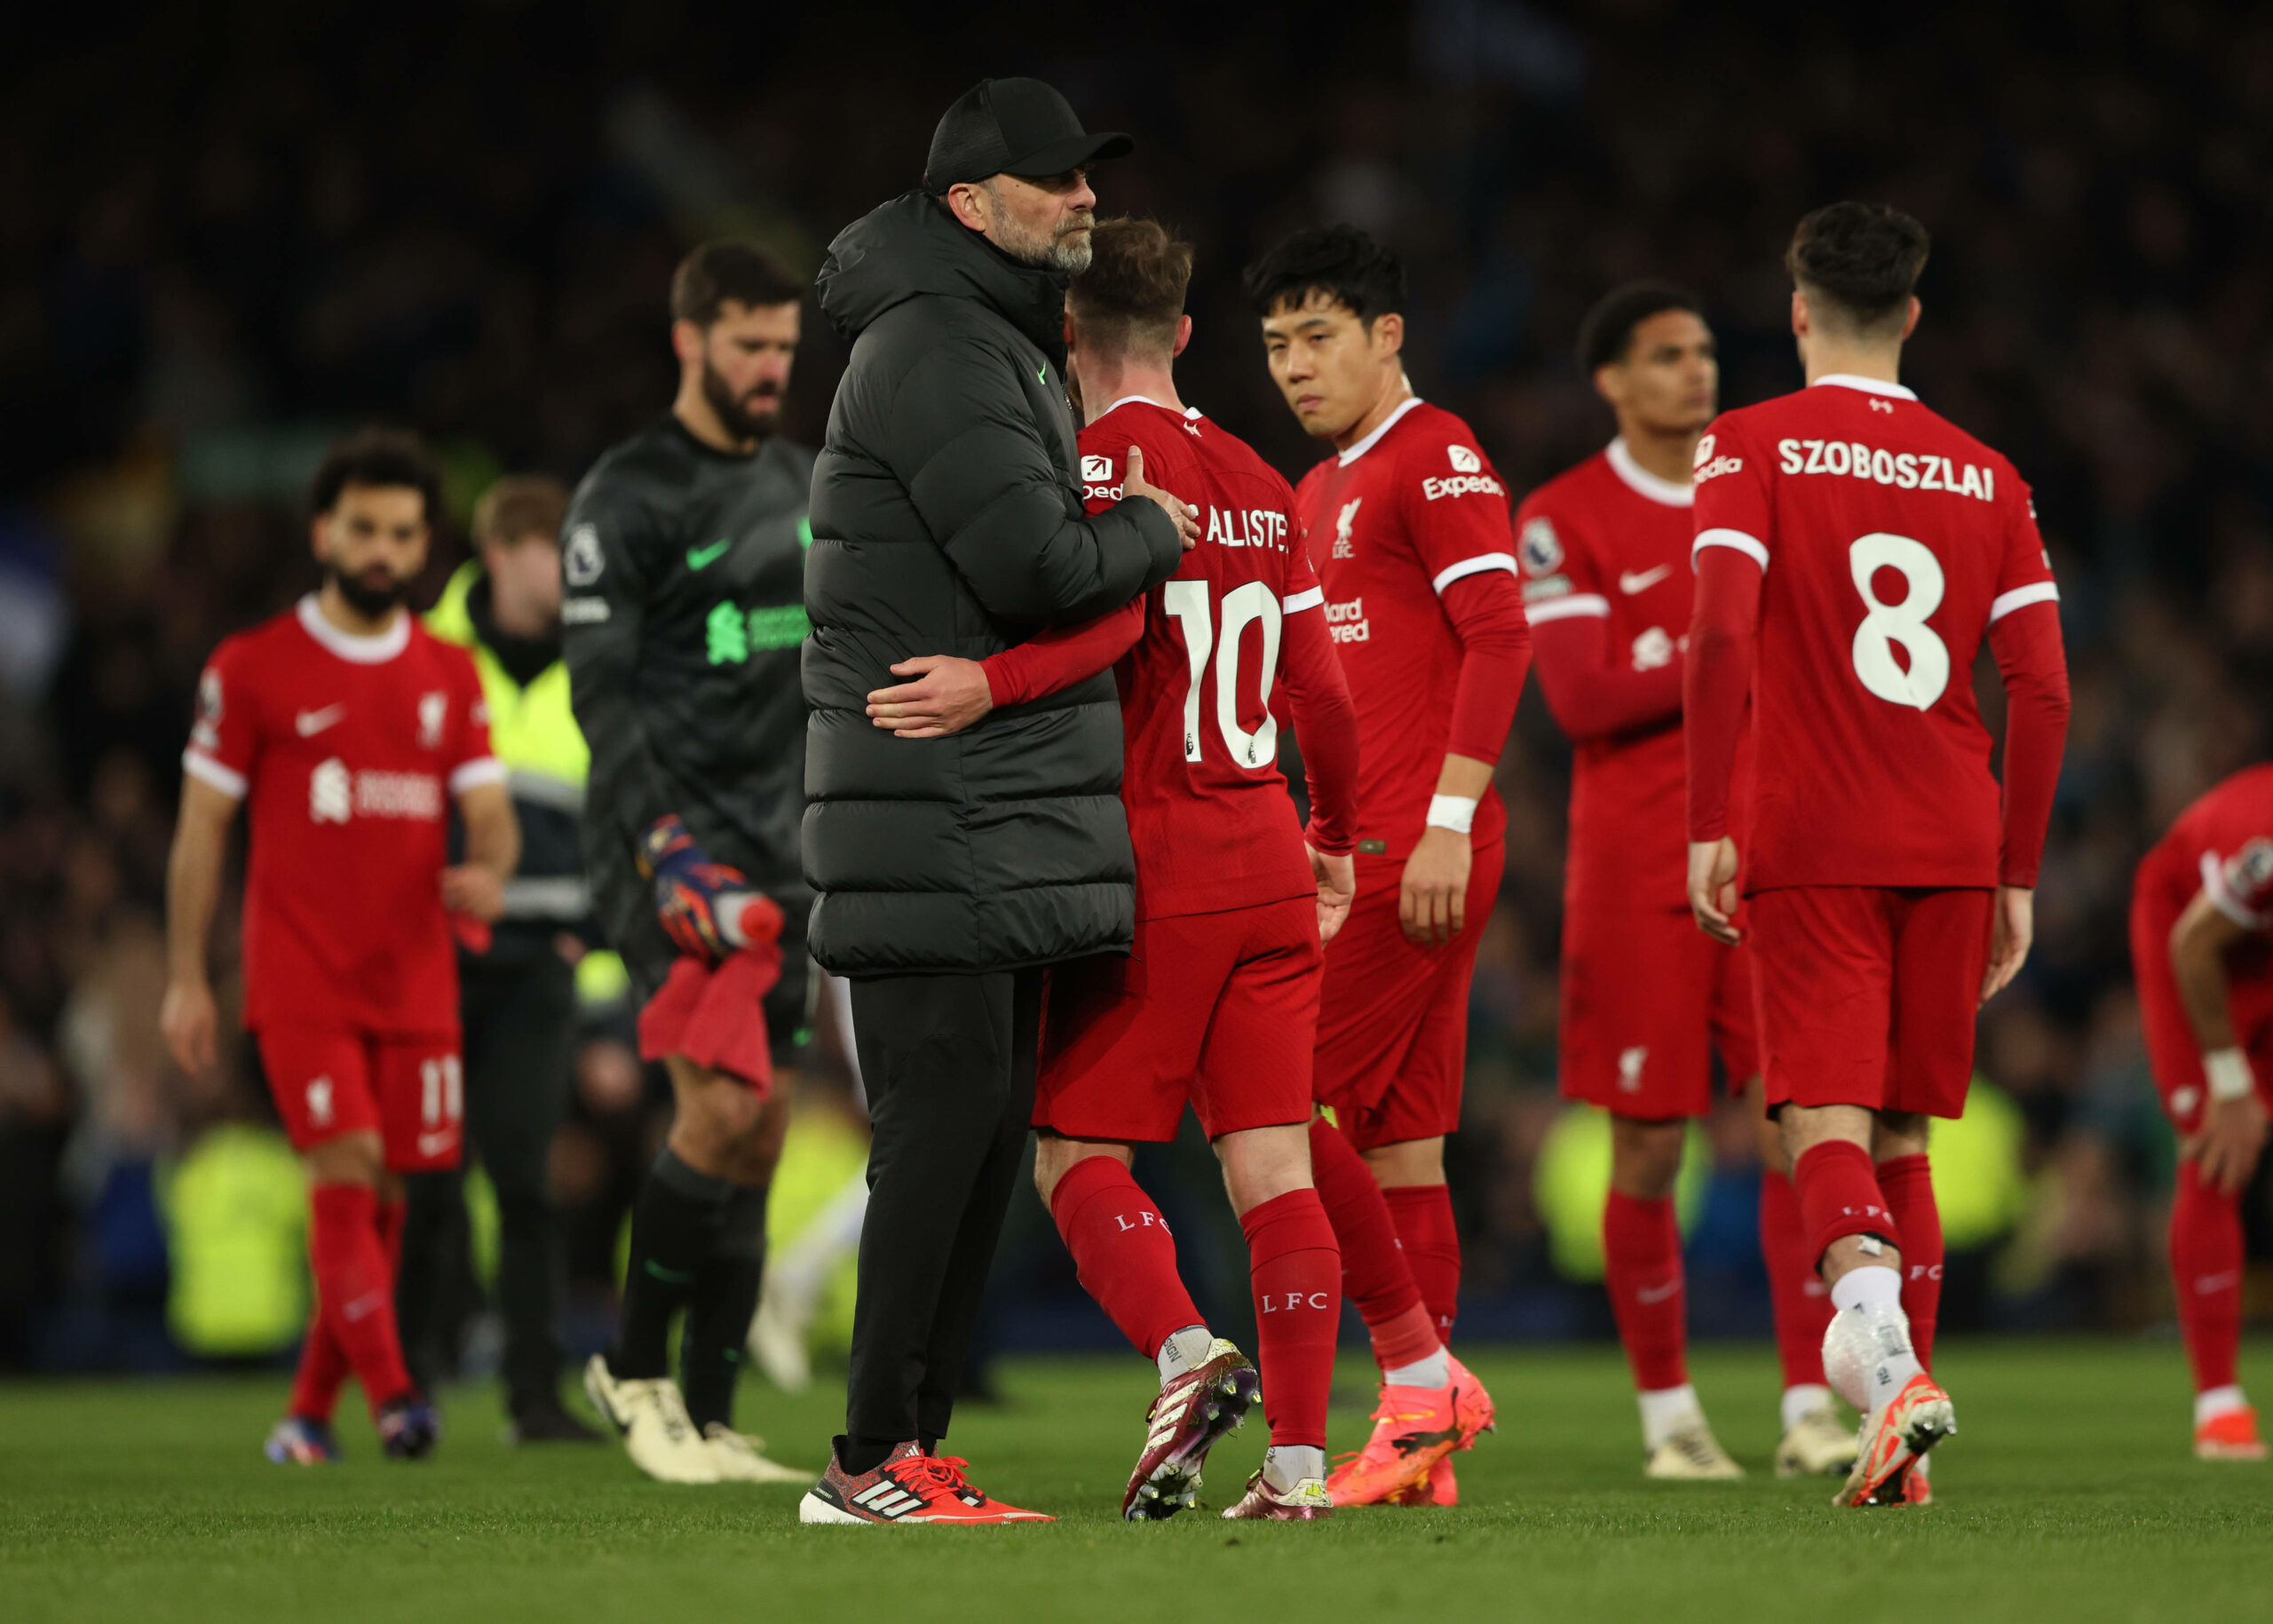 Liverpool's Title Race in Tatters Following Merseyside Derby Defeat to Everton